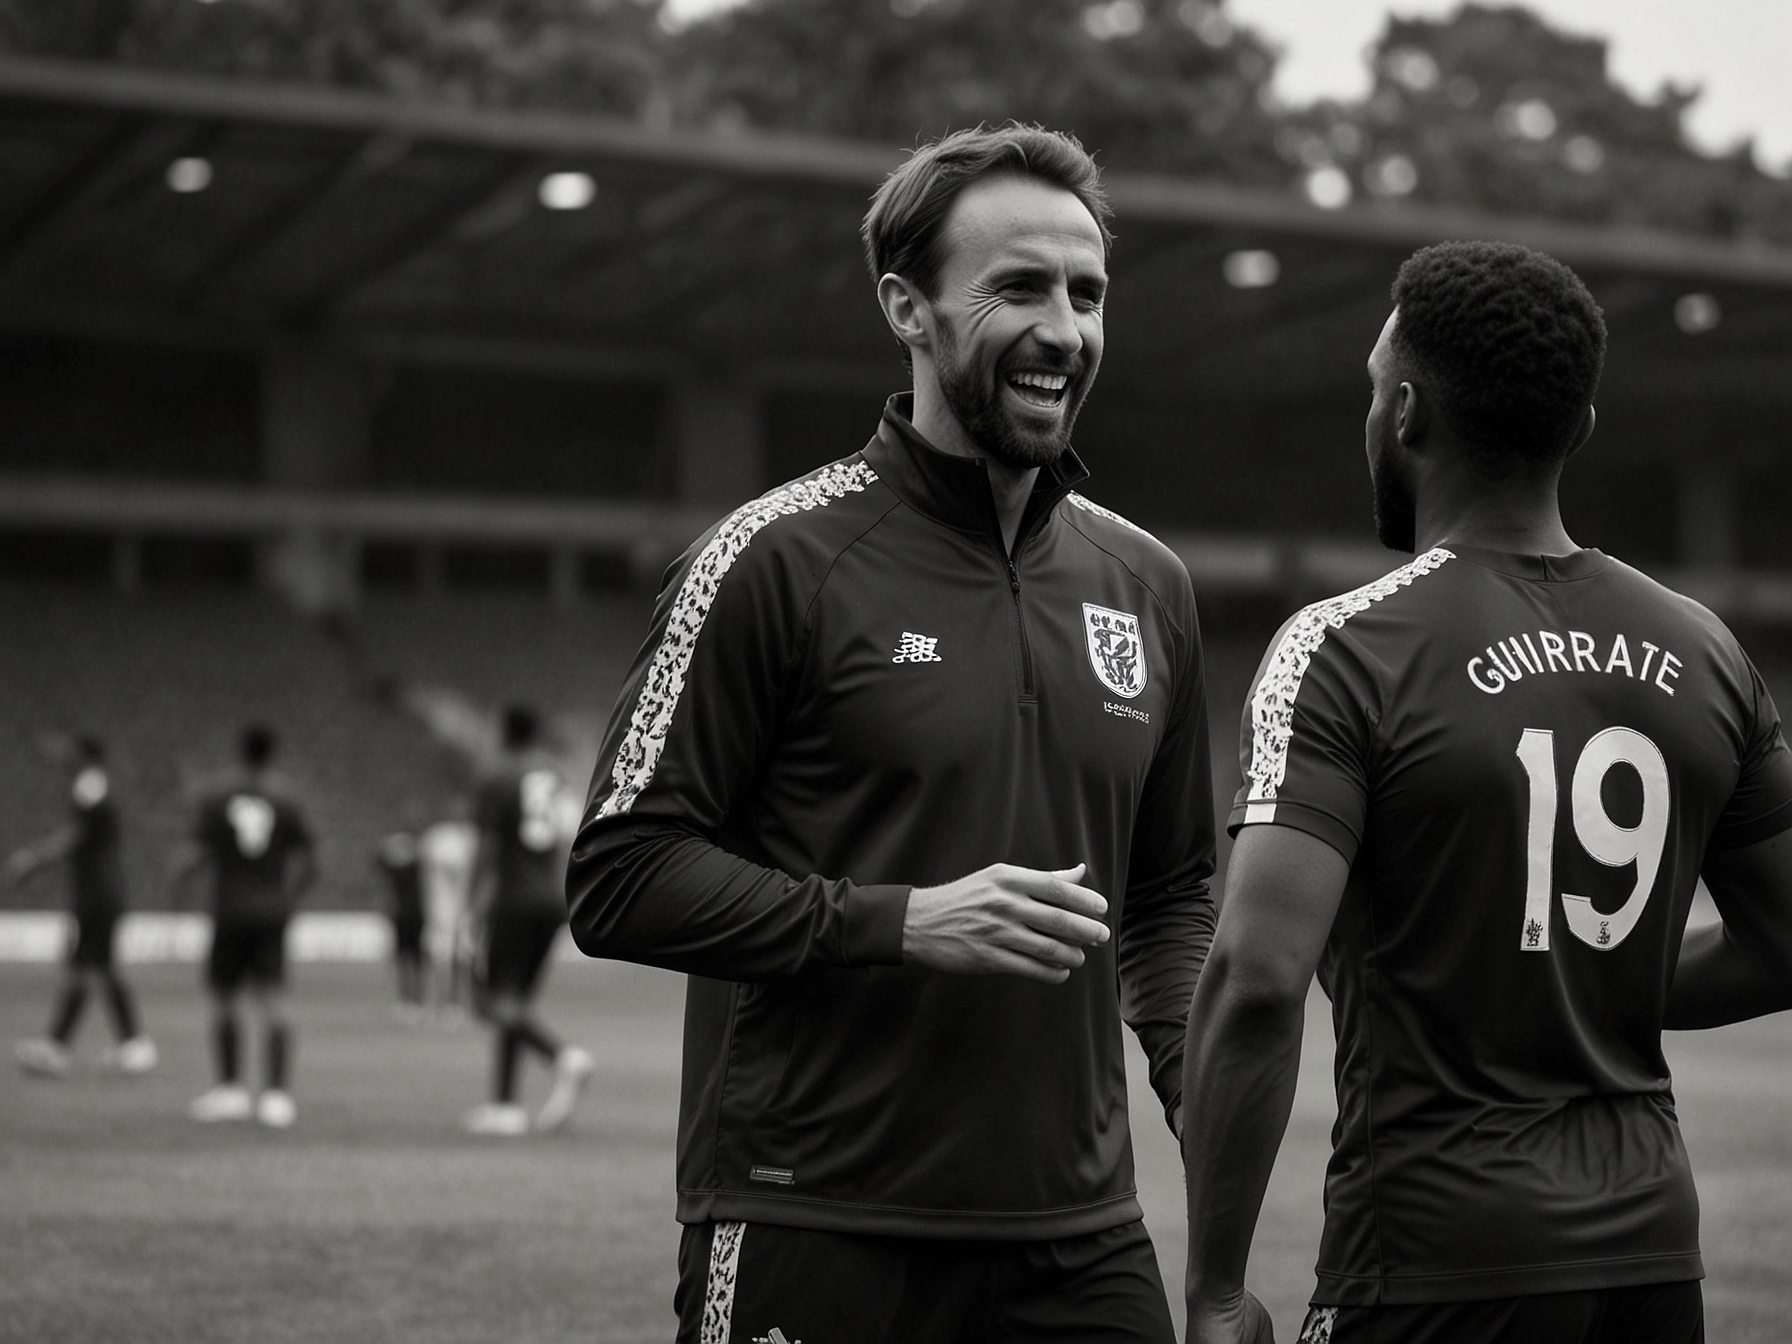 Gareth Southgate engaging with players during a training session, exemplifying his hands-on and motivational coaching style.